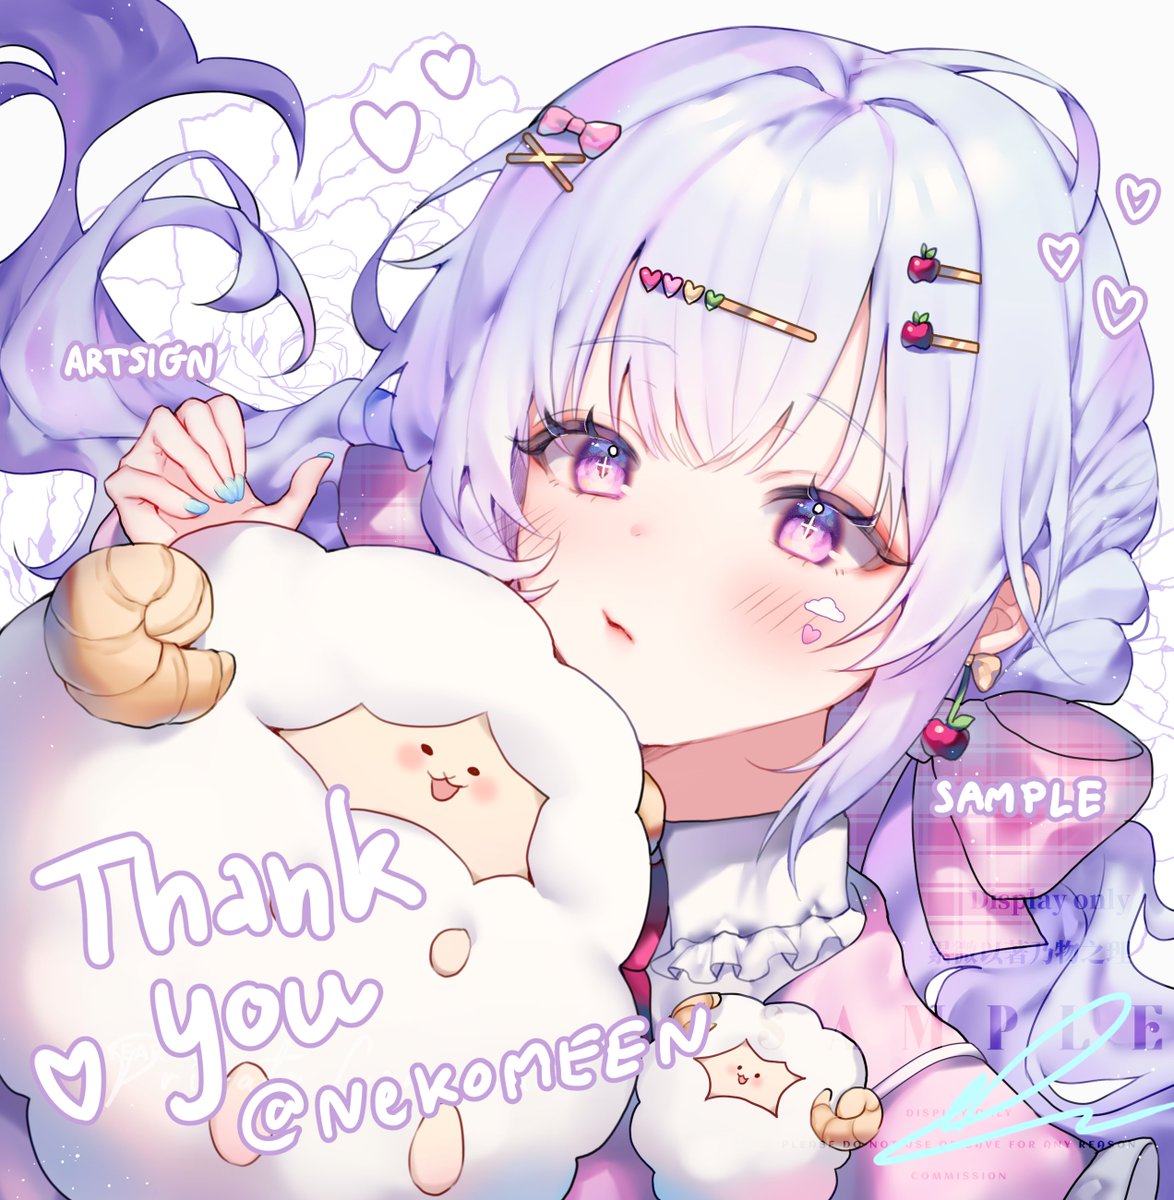 [CM] for menrqx //// Thank you so much for watching my live today วันนี้คนเยอะมาก ดีใจ! and her color is so pastel. I LOVE IT 😭😭😭  #commissions